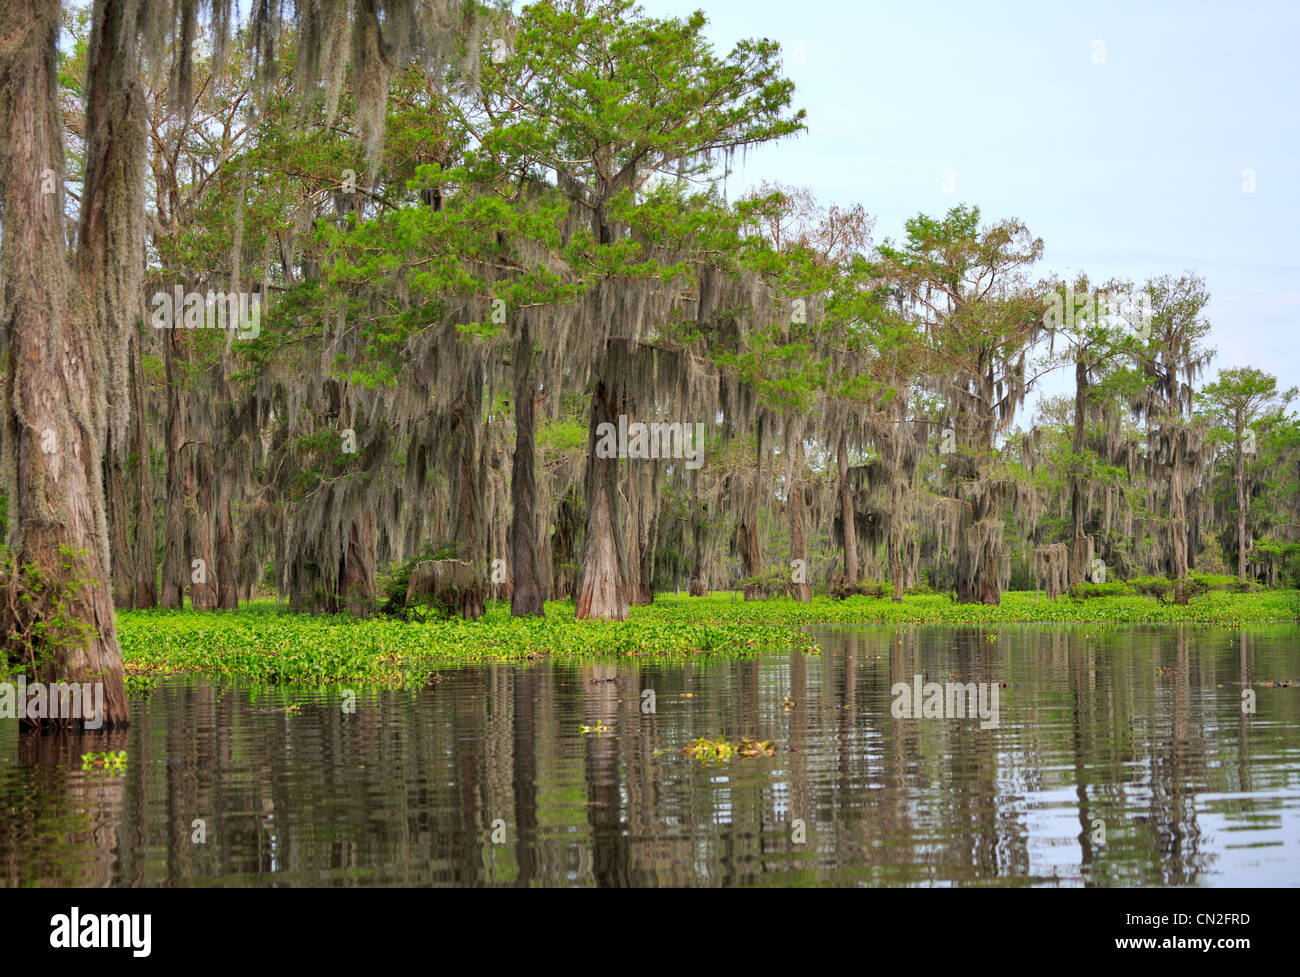 Common Water Hyacinth, Eichhornia crassipes chokes the important wetlands of the Atchafalaya River Basin. Stock Photo